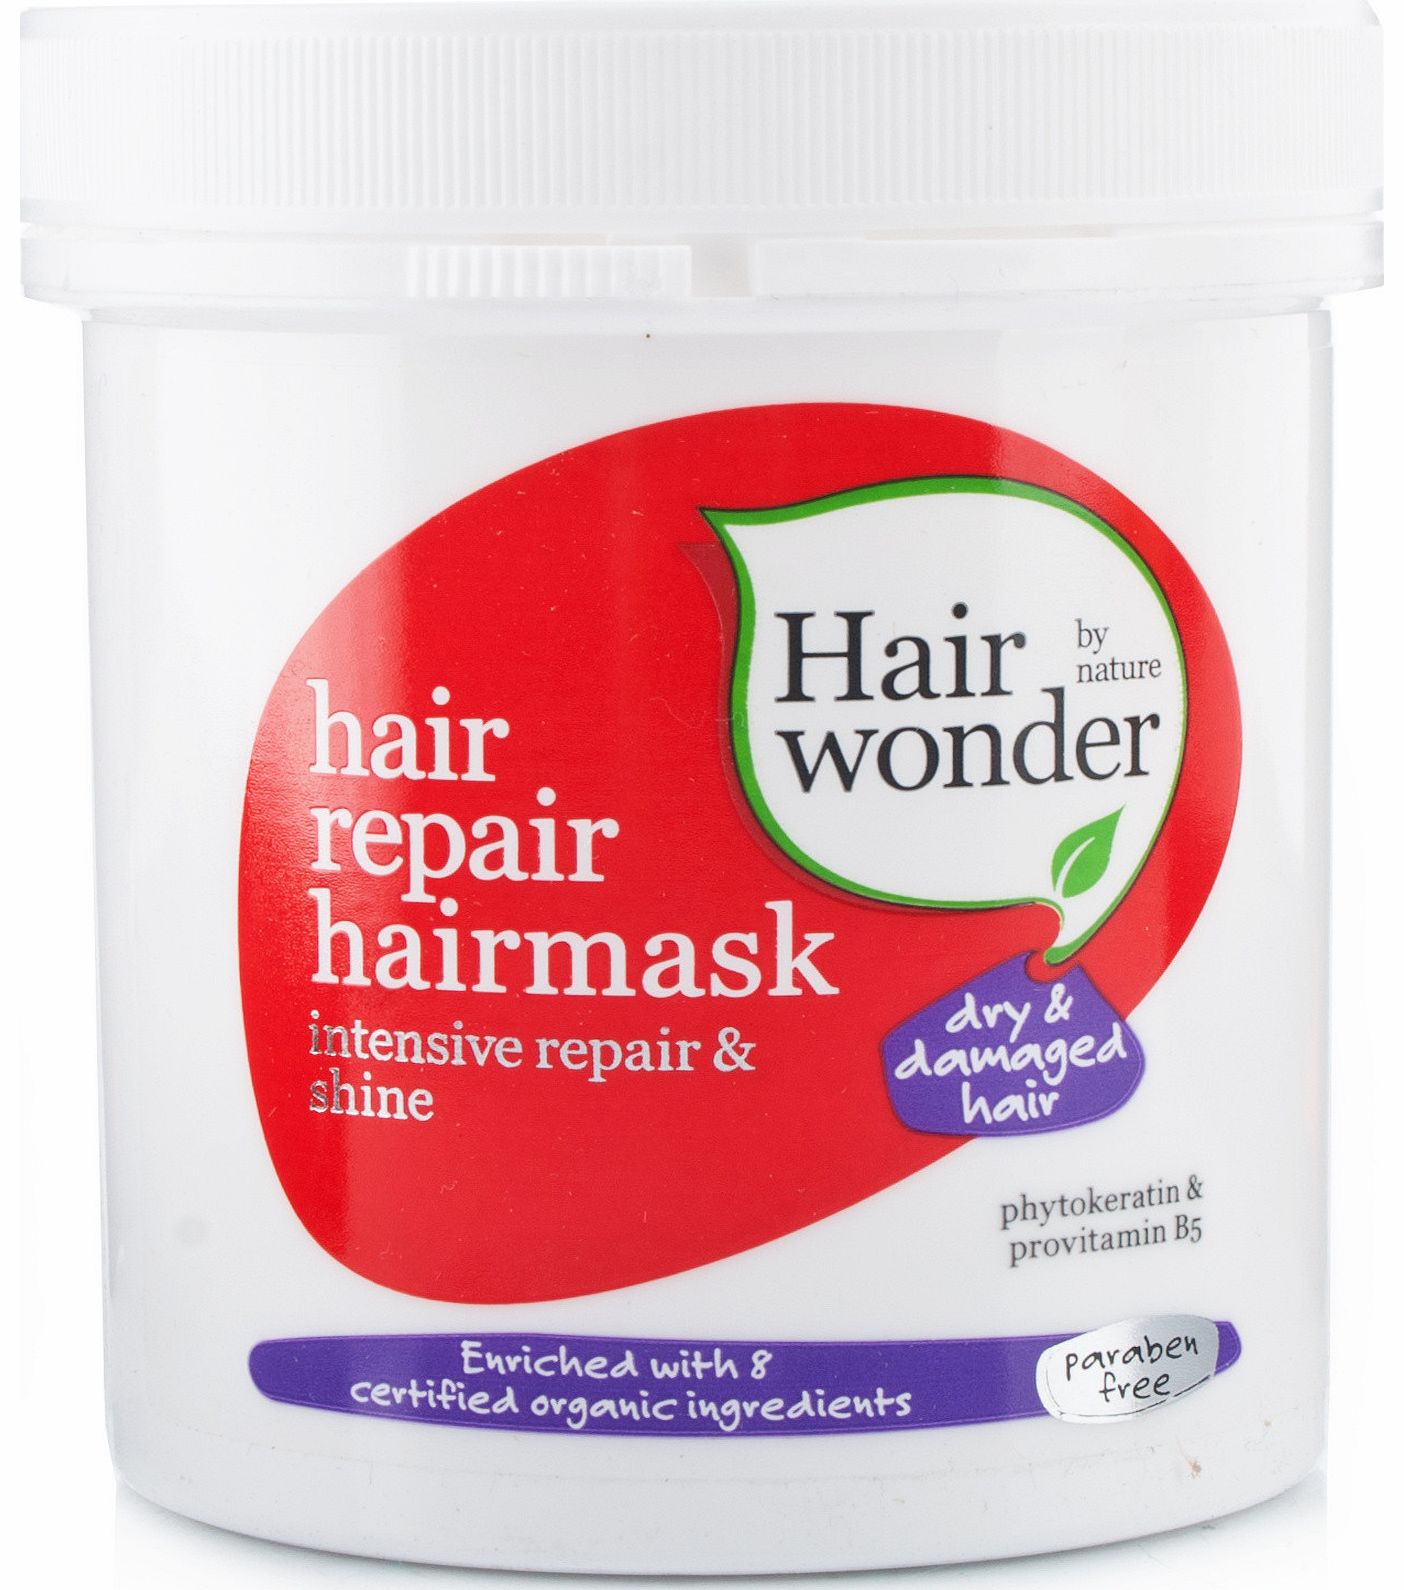 Hair Wonder Hair Repair Hairmask is ideal for dry and damaged hair. The hairmask repairs and nourishes damaged hair in one single treatment resulting in strong, shiny and silky soft hair. The ultimate product uses Phytokeratin and Provitamin B5 formu